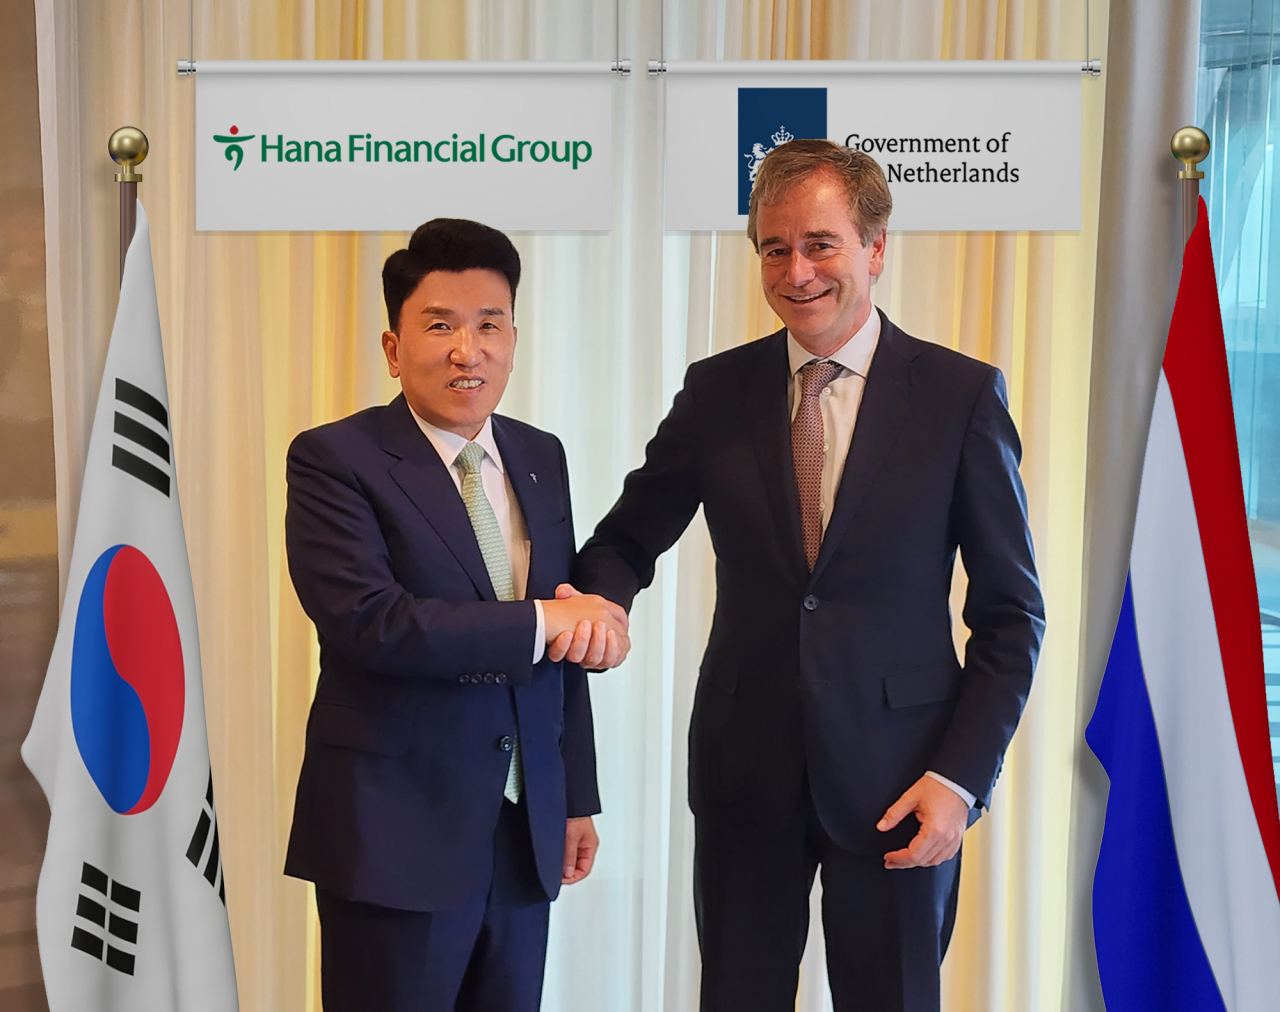 Hana Financial Group Chairman Ham Young-joo (left) shakes hands with Rene van Hell, ambassador for sustainable development for the Netherlands, in The Hague, Netherlands, Friday. (Hana Financial Group)